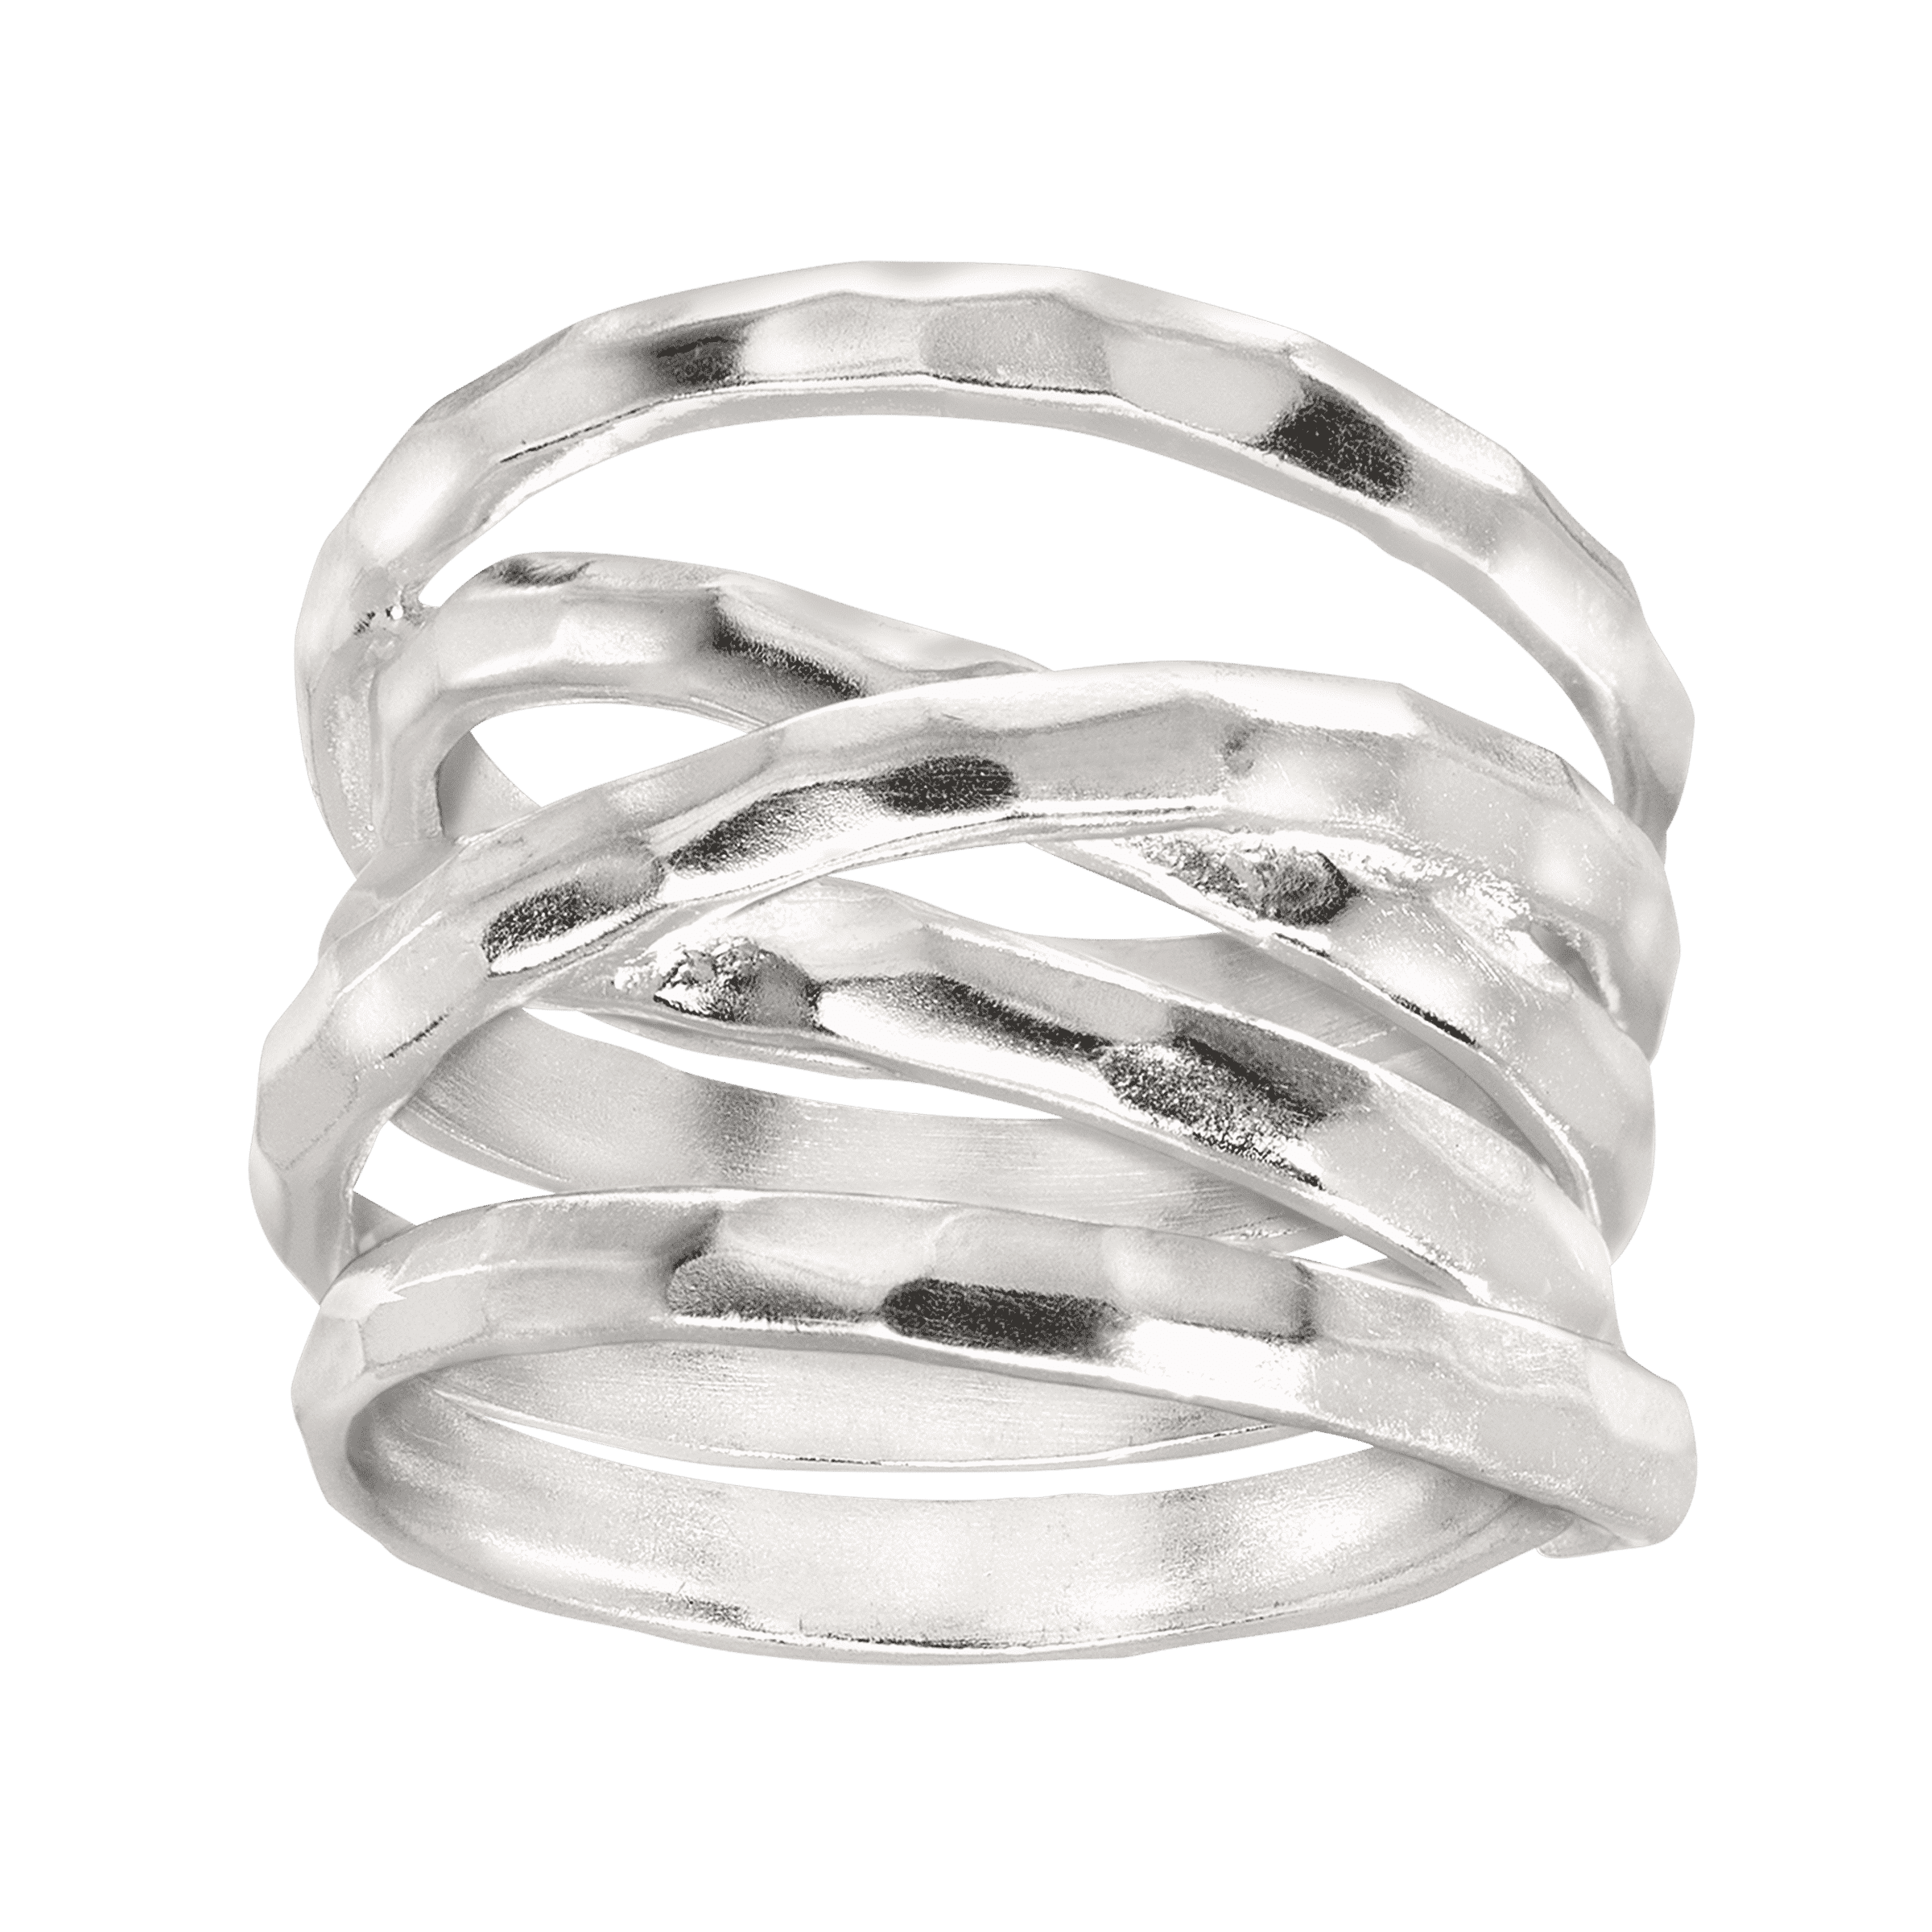 Wrapped Up Ring, Silver